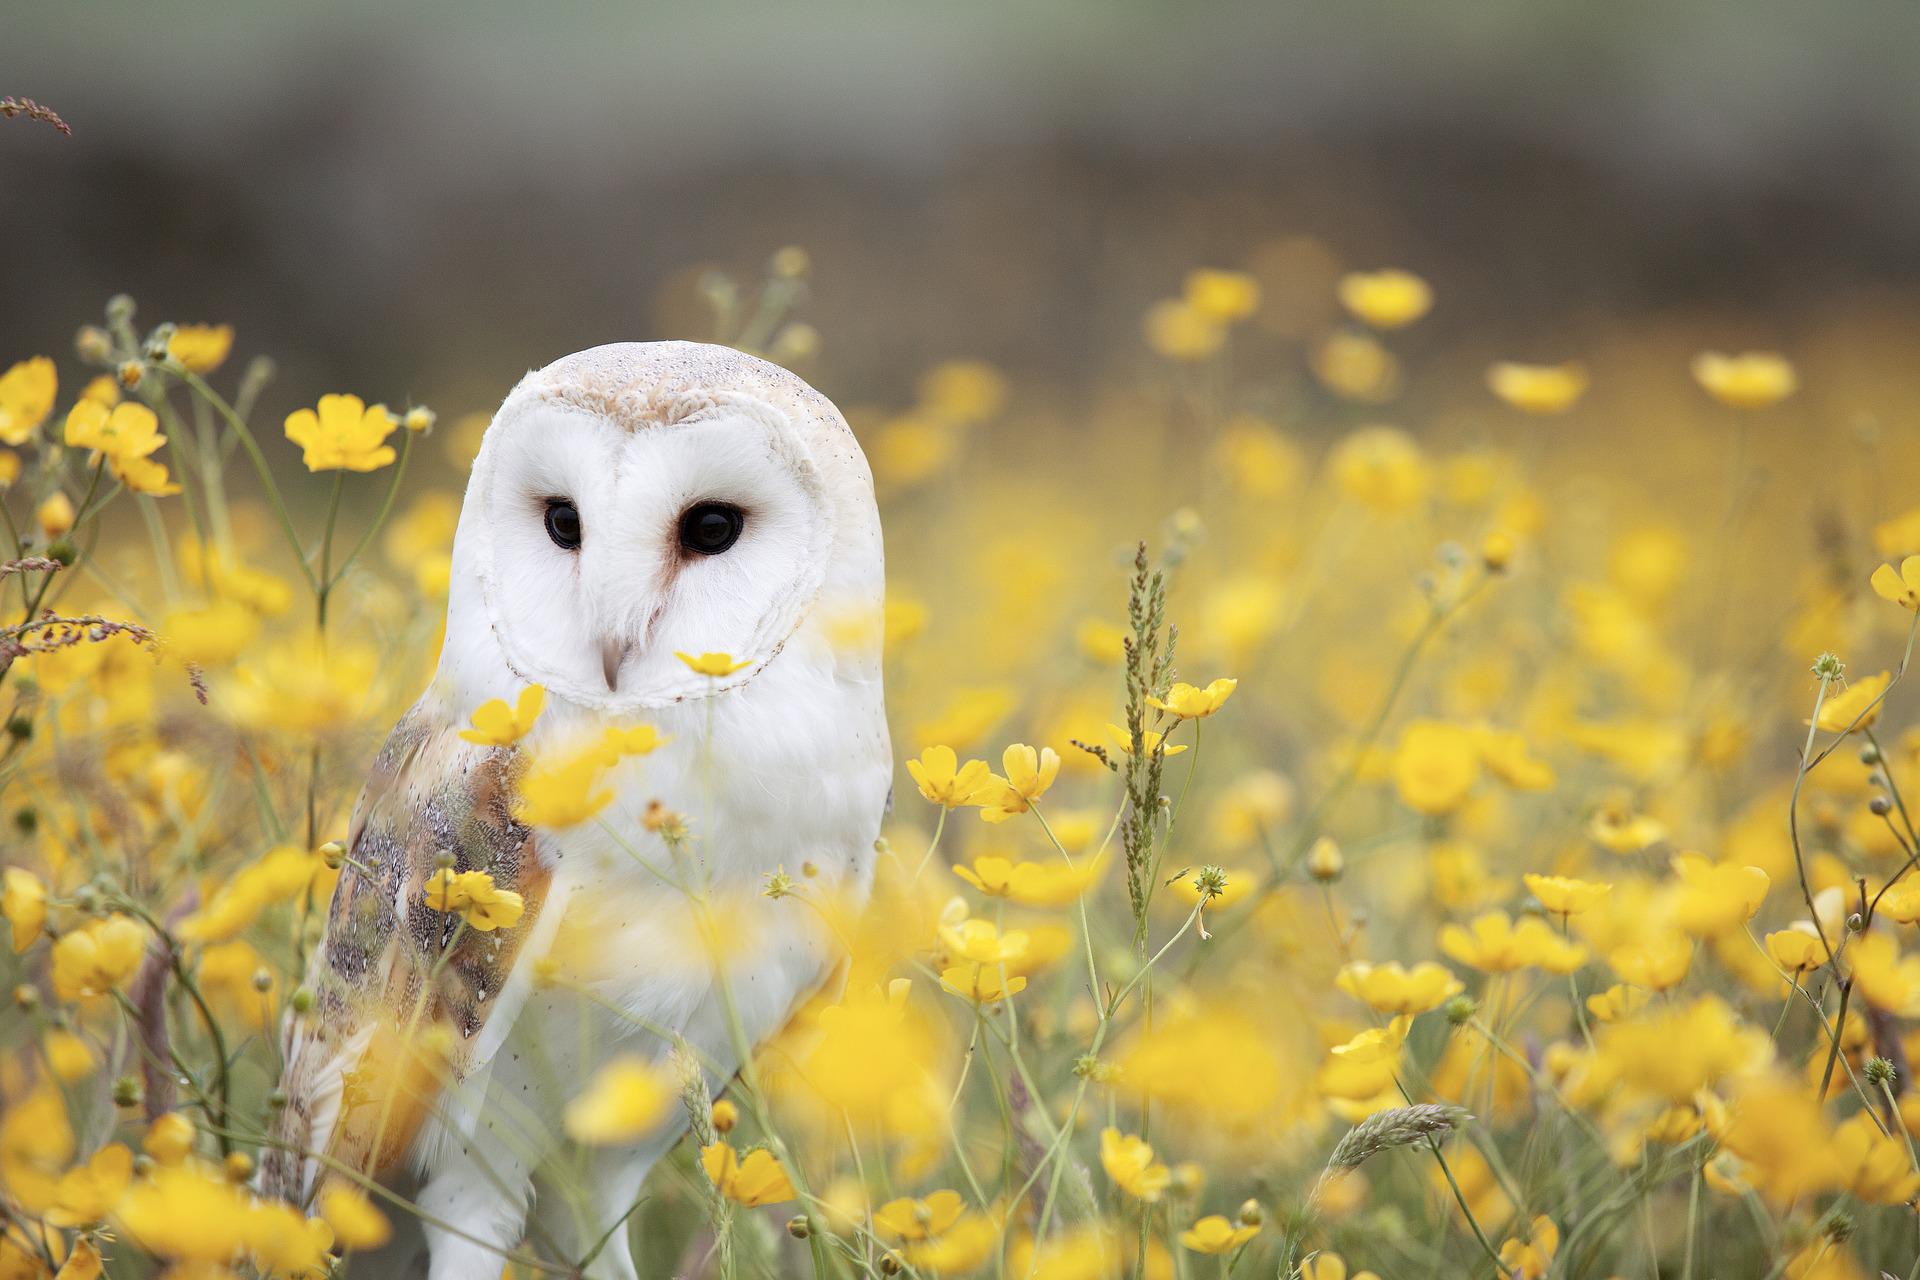 Barn Owl: Spiritual Meaning, Dream Meaning, Symbolism & More -